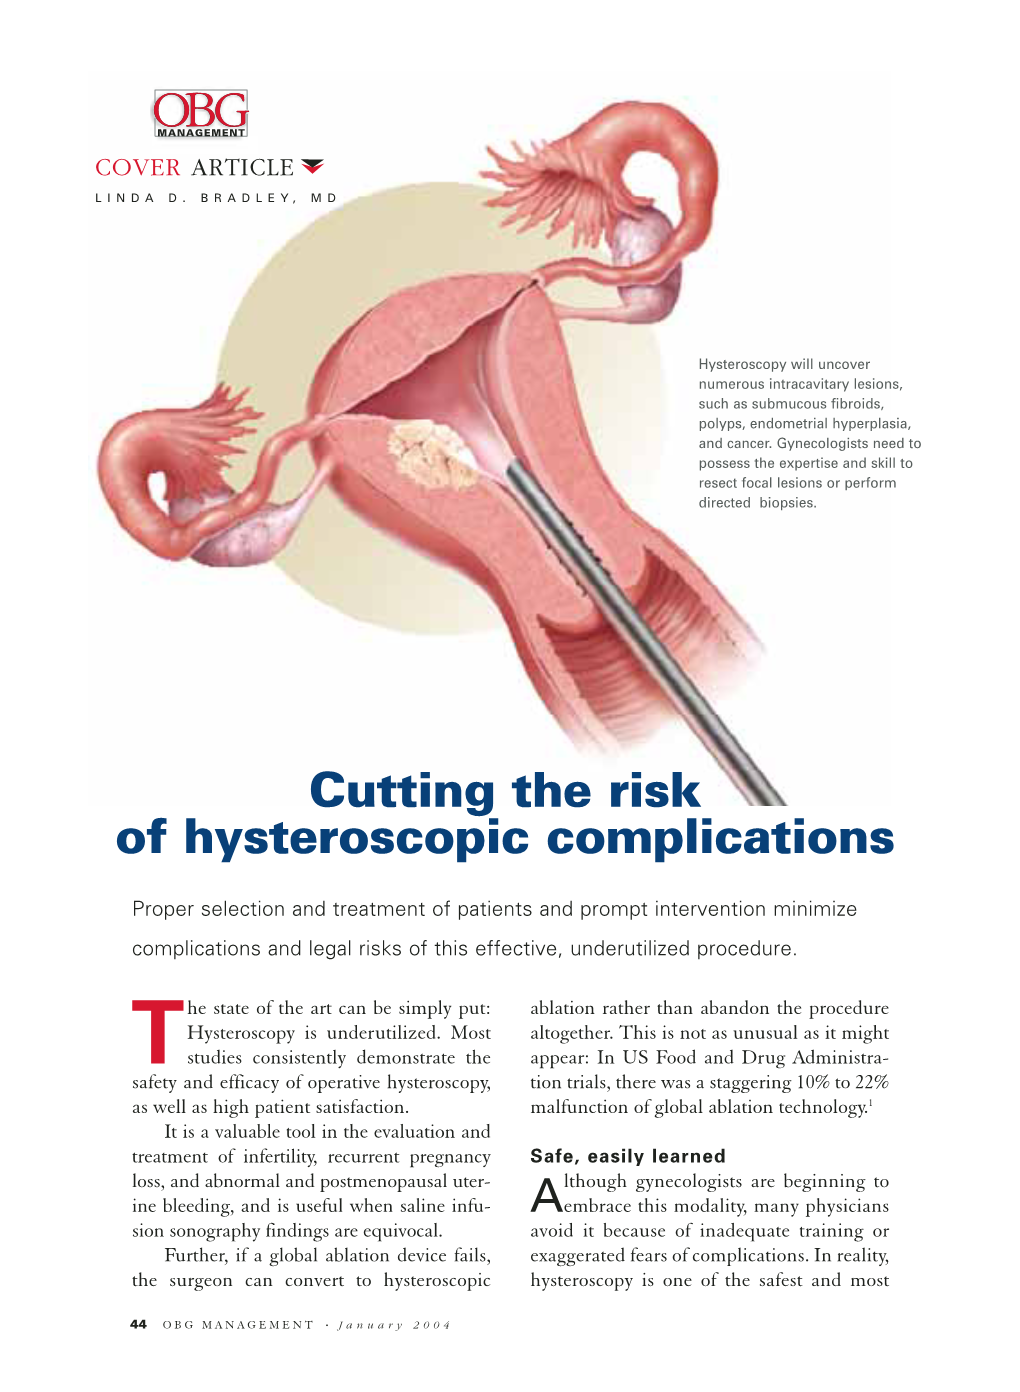 Cutting the Risk of Hysteroscopic Complications